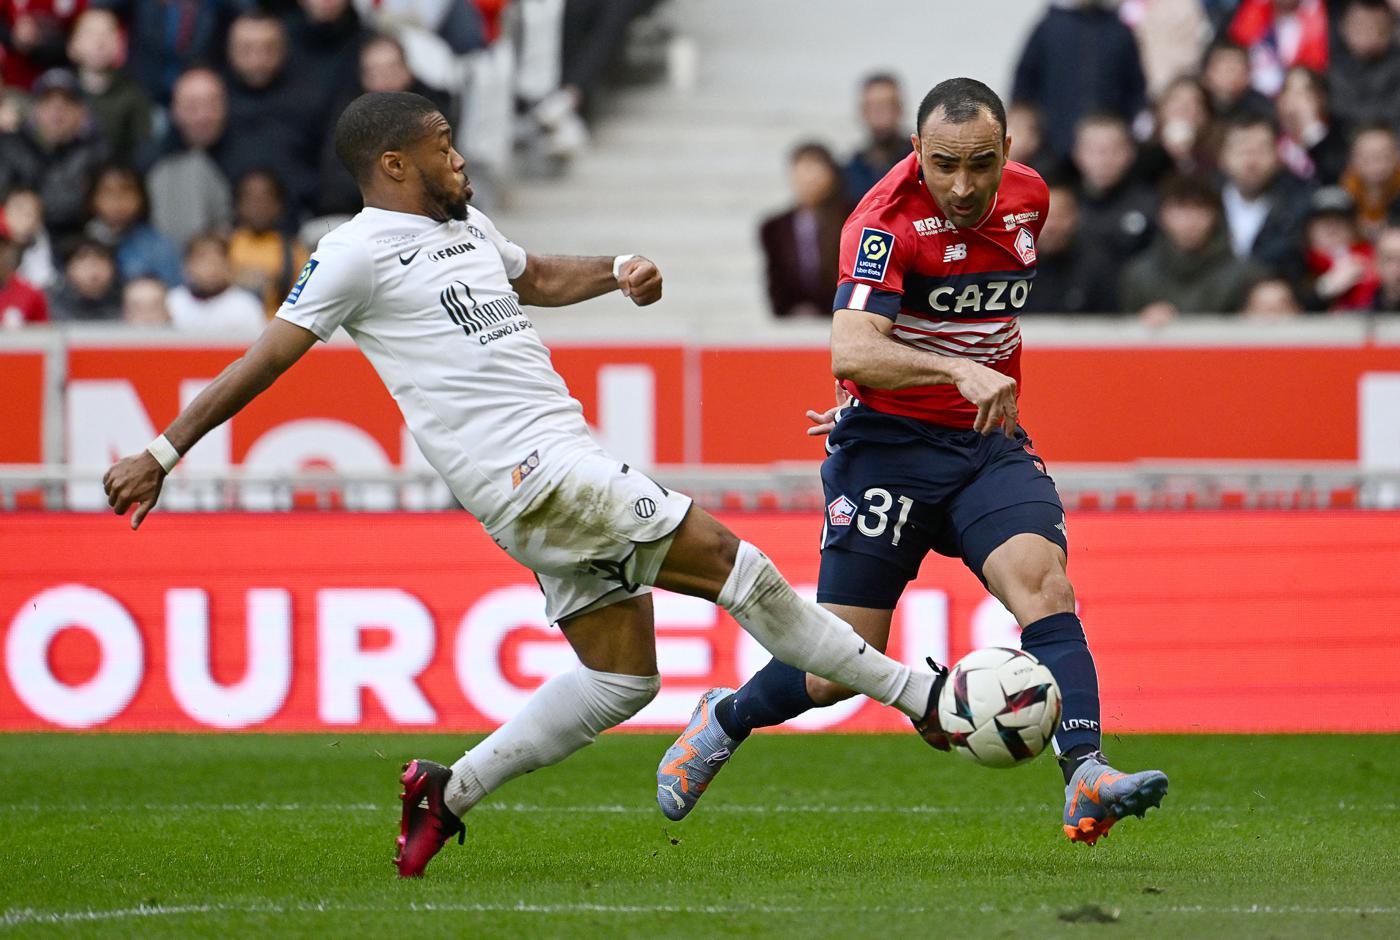 statistics Lille - Montpellier - 2:1. French Championship, round 31. Match review,